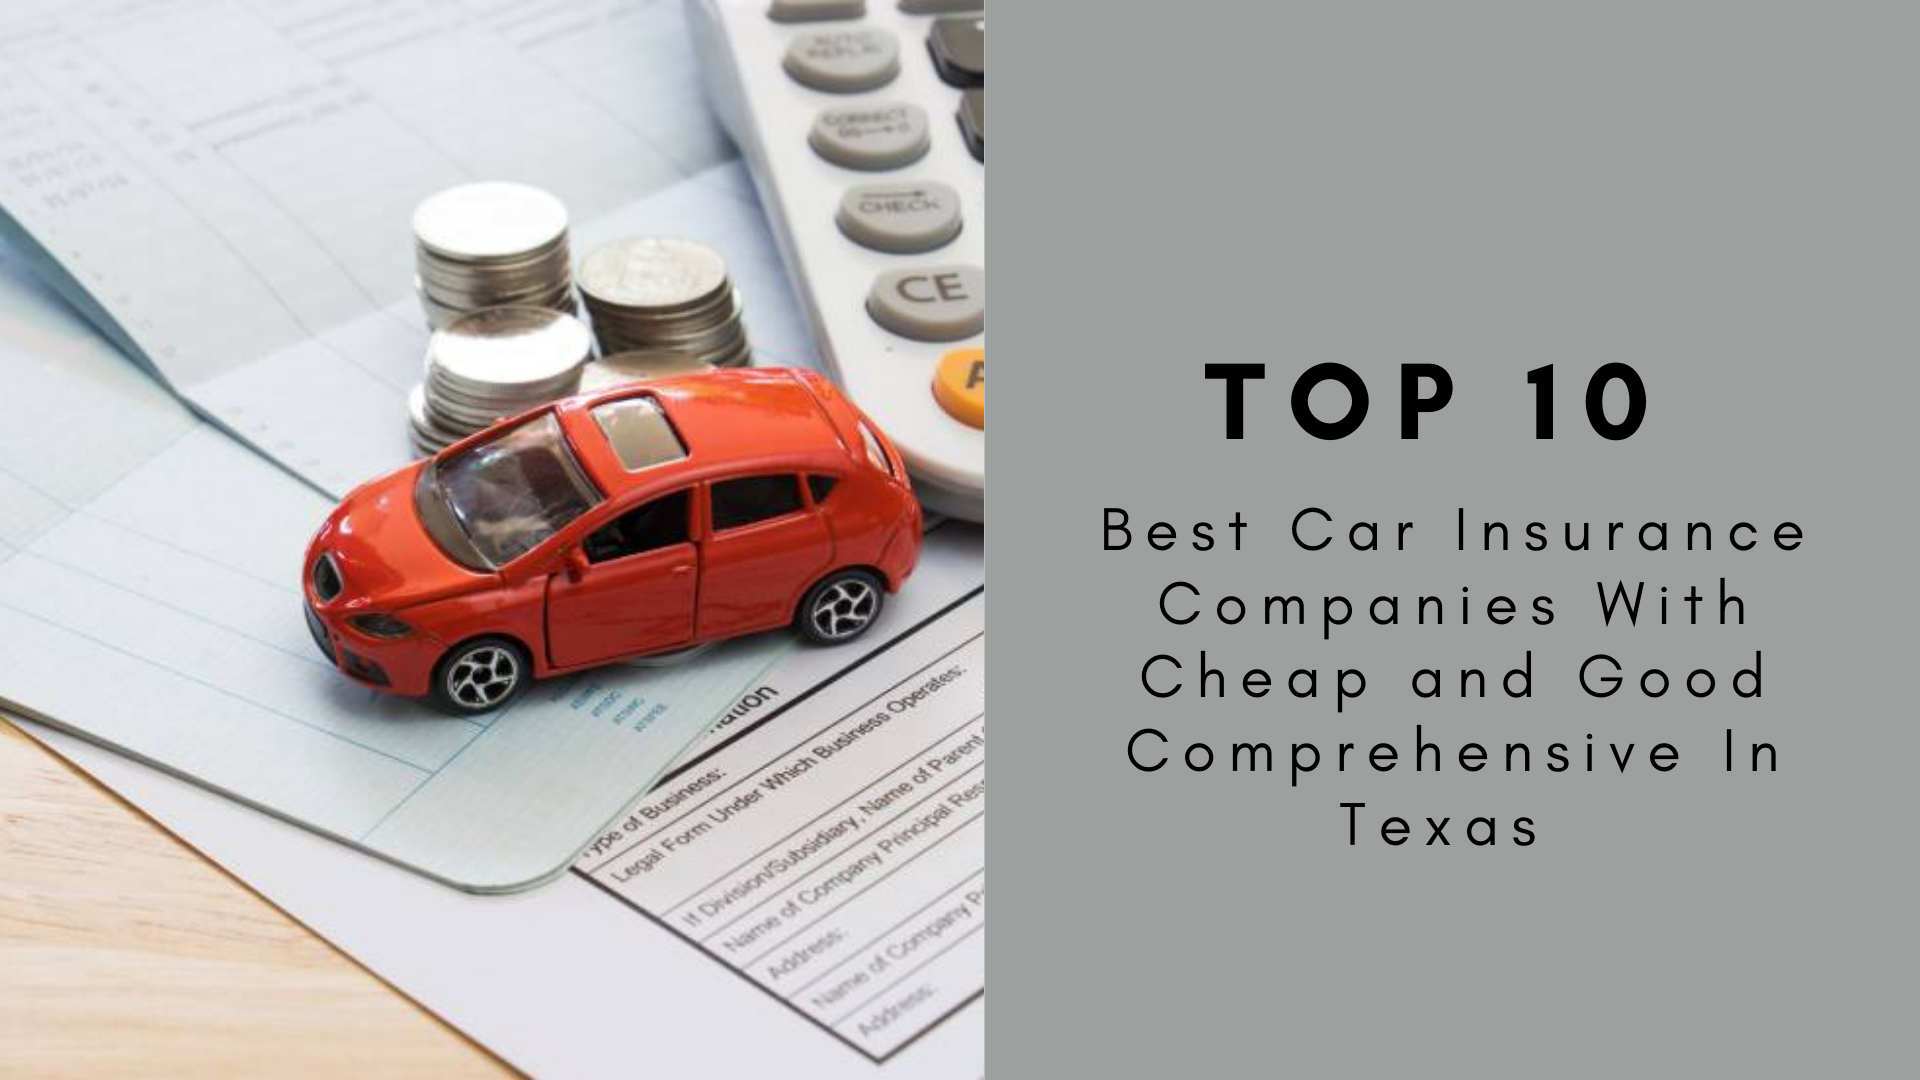 Top 10 Best Car Insurance Companies With Cheap and Good Comprehensive In Texas 